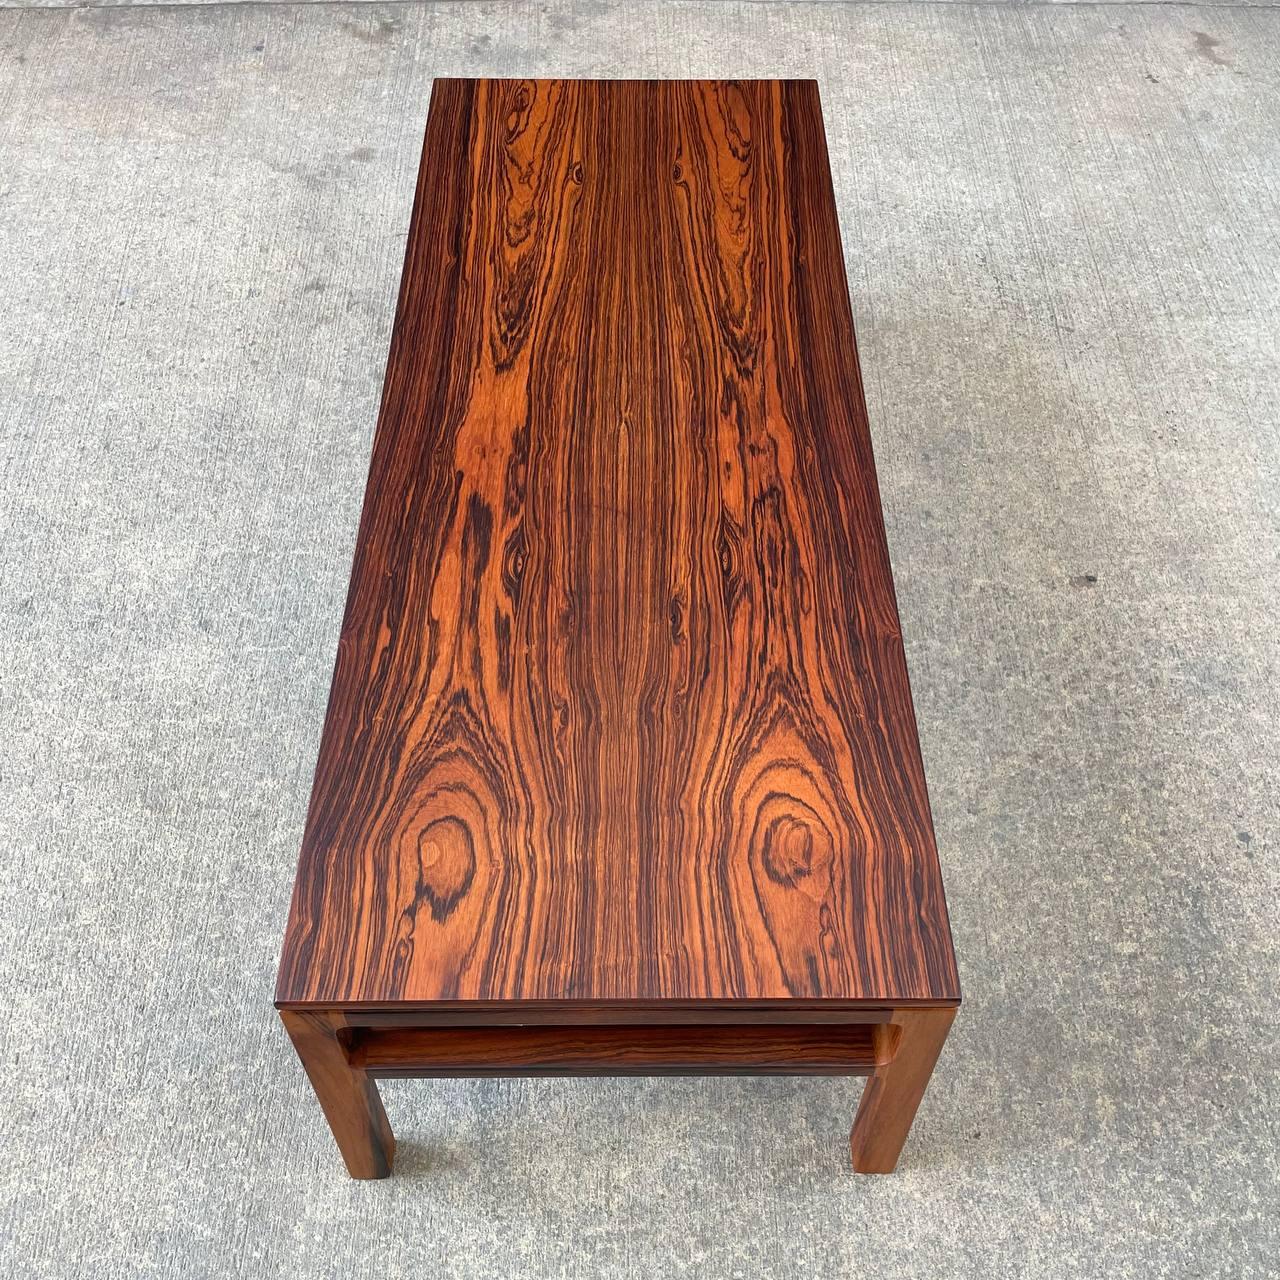 Newly Refinished-Mid-Century Danish Modern Rosewood Coffee Table Illums Bolighus In Excellent Condition For Sale In Los Angeles, CA